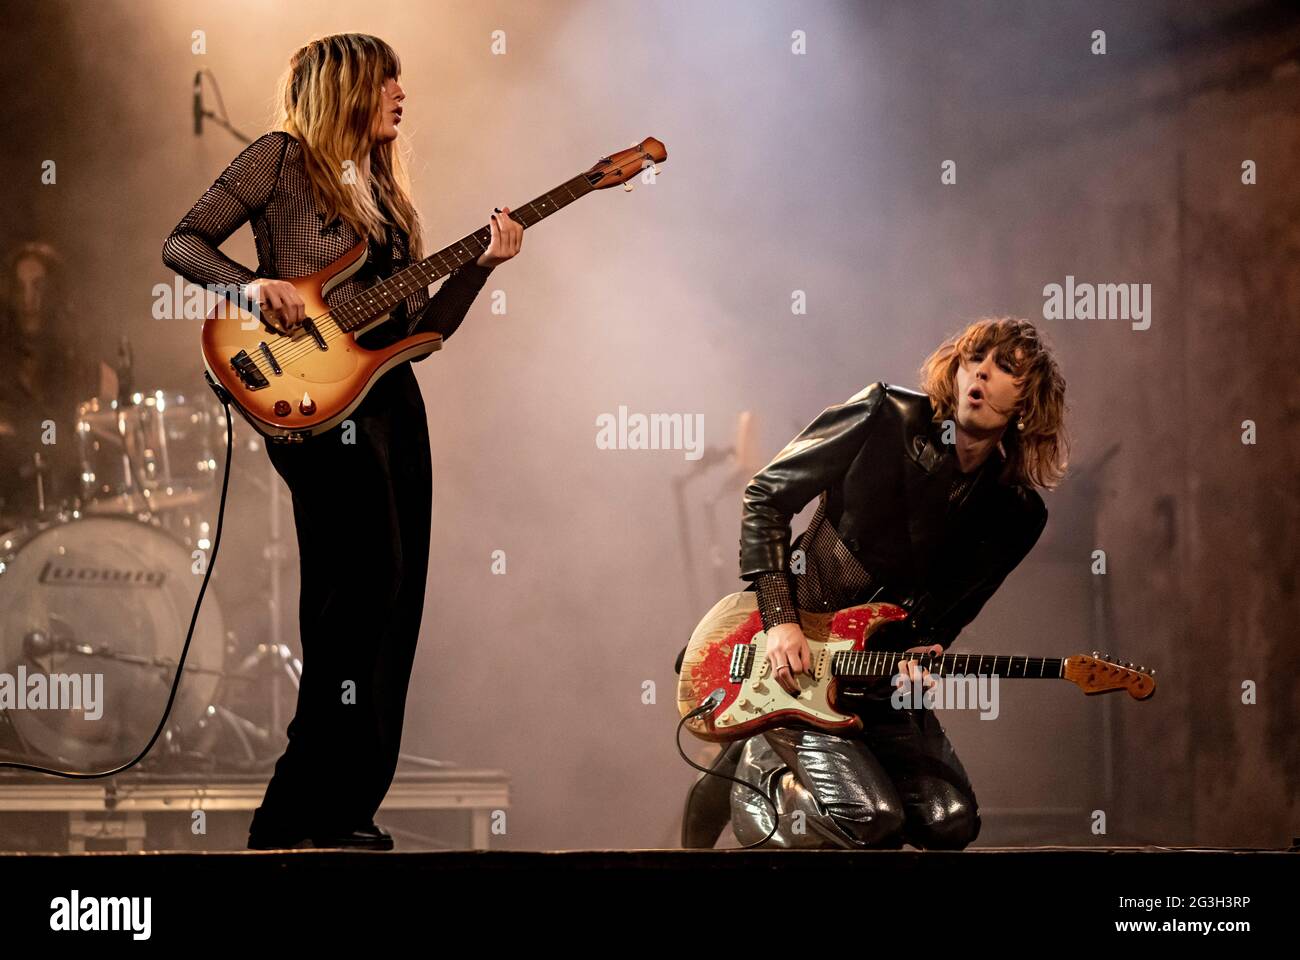 Berlin, Germany. 16th June, 2021. Victoria De Angelis and Thomas Raggi of the band Maneskin play a live concert for the video portal TikTok at the SchwuZ Queer Club. Credit: Fabian Sommer/dpa/Alamy Live News Stock Photo